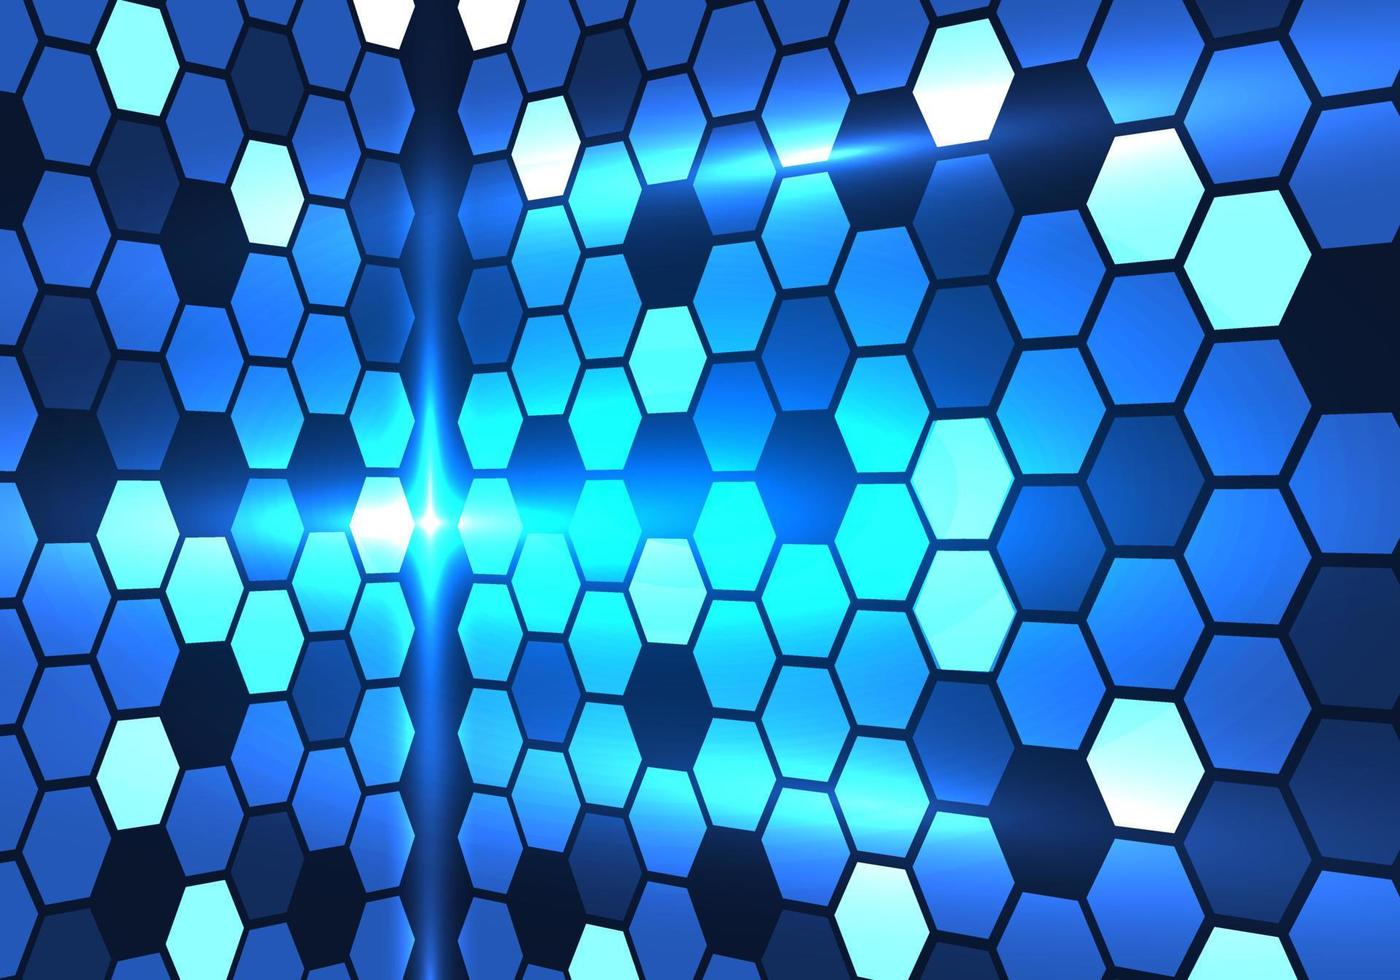 Abstract technology background, hexagonal shapes placed together in many pieces, with light passing through it, giving it a more modern and elegant look. Focus on the floor, mainly using the blue dial vector